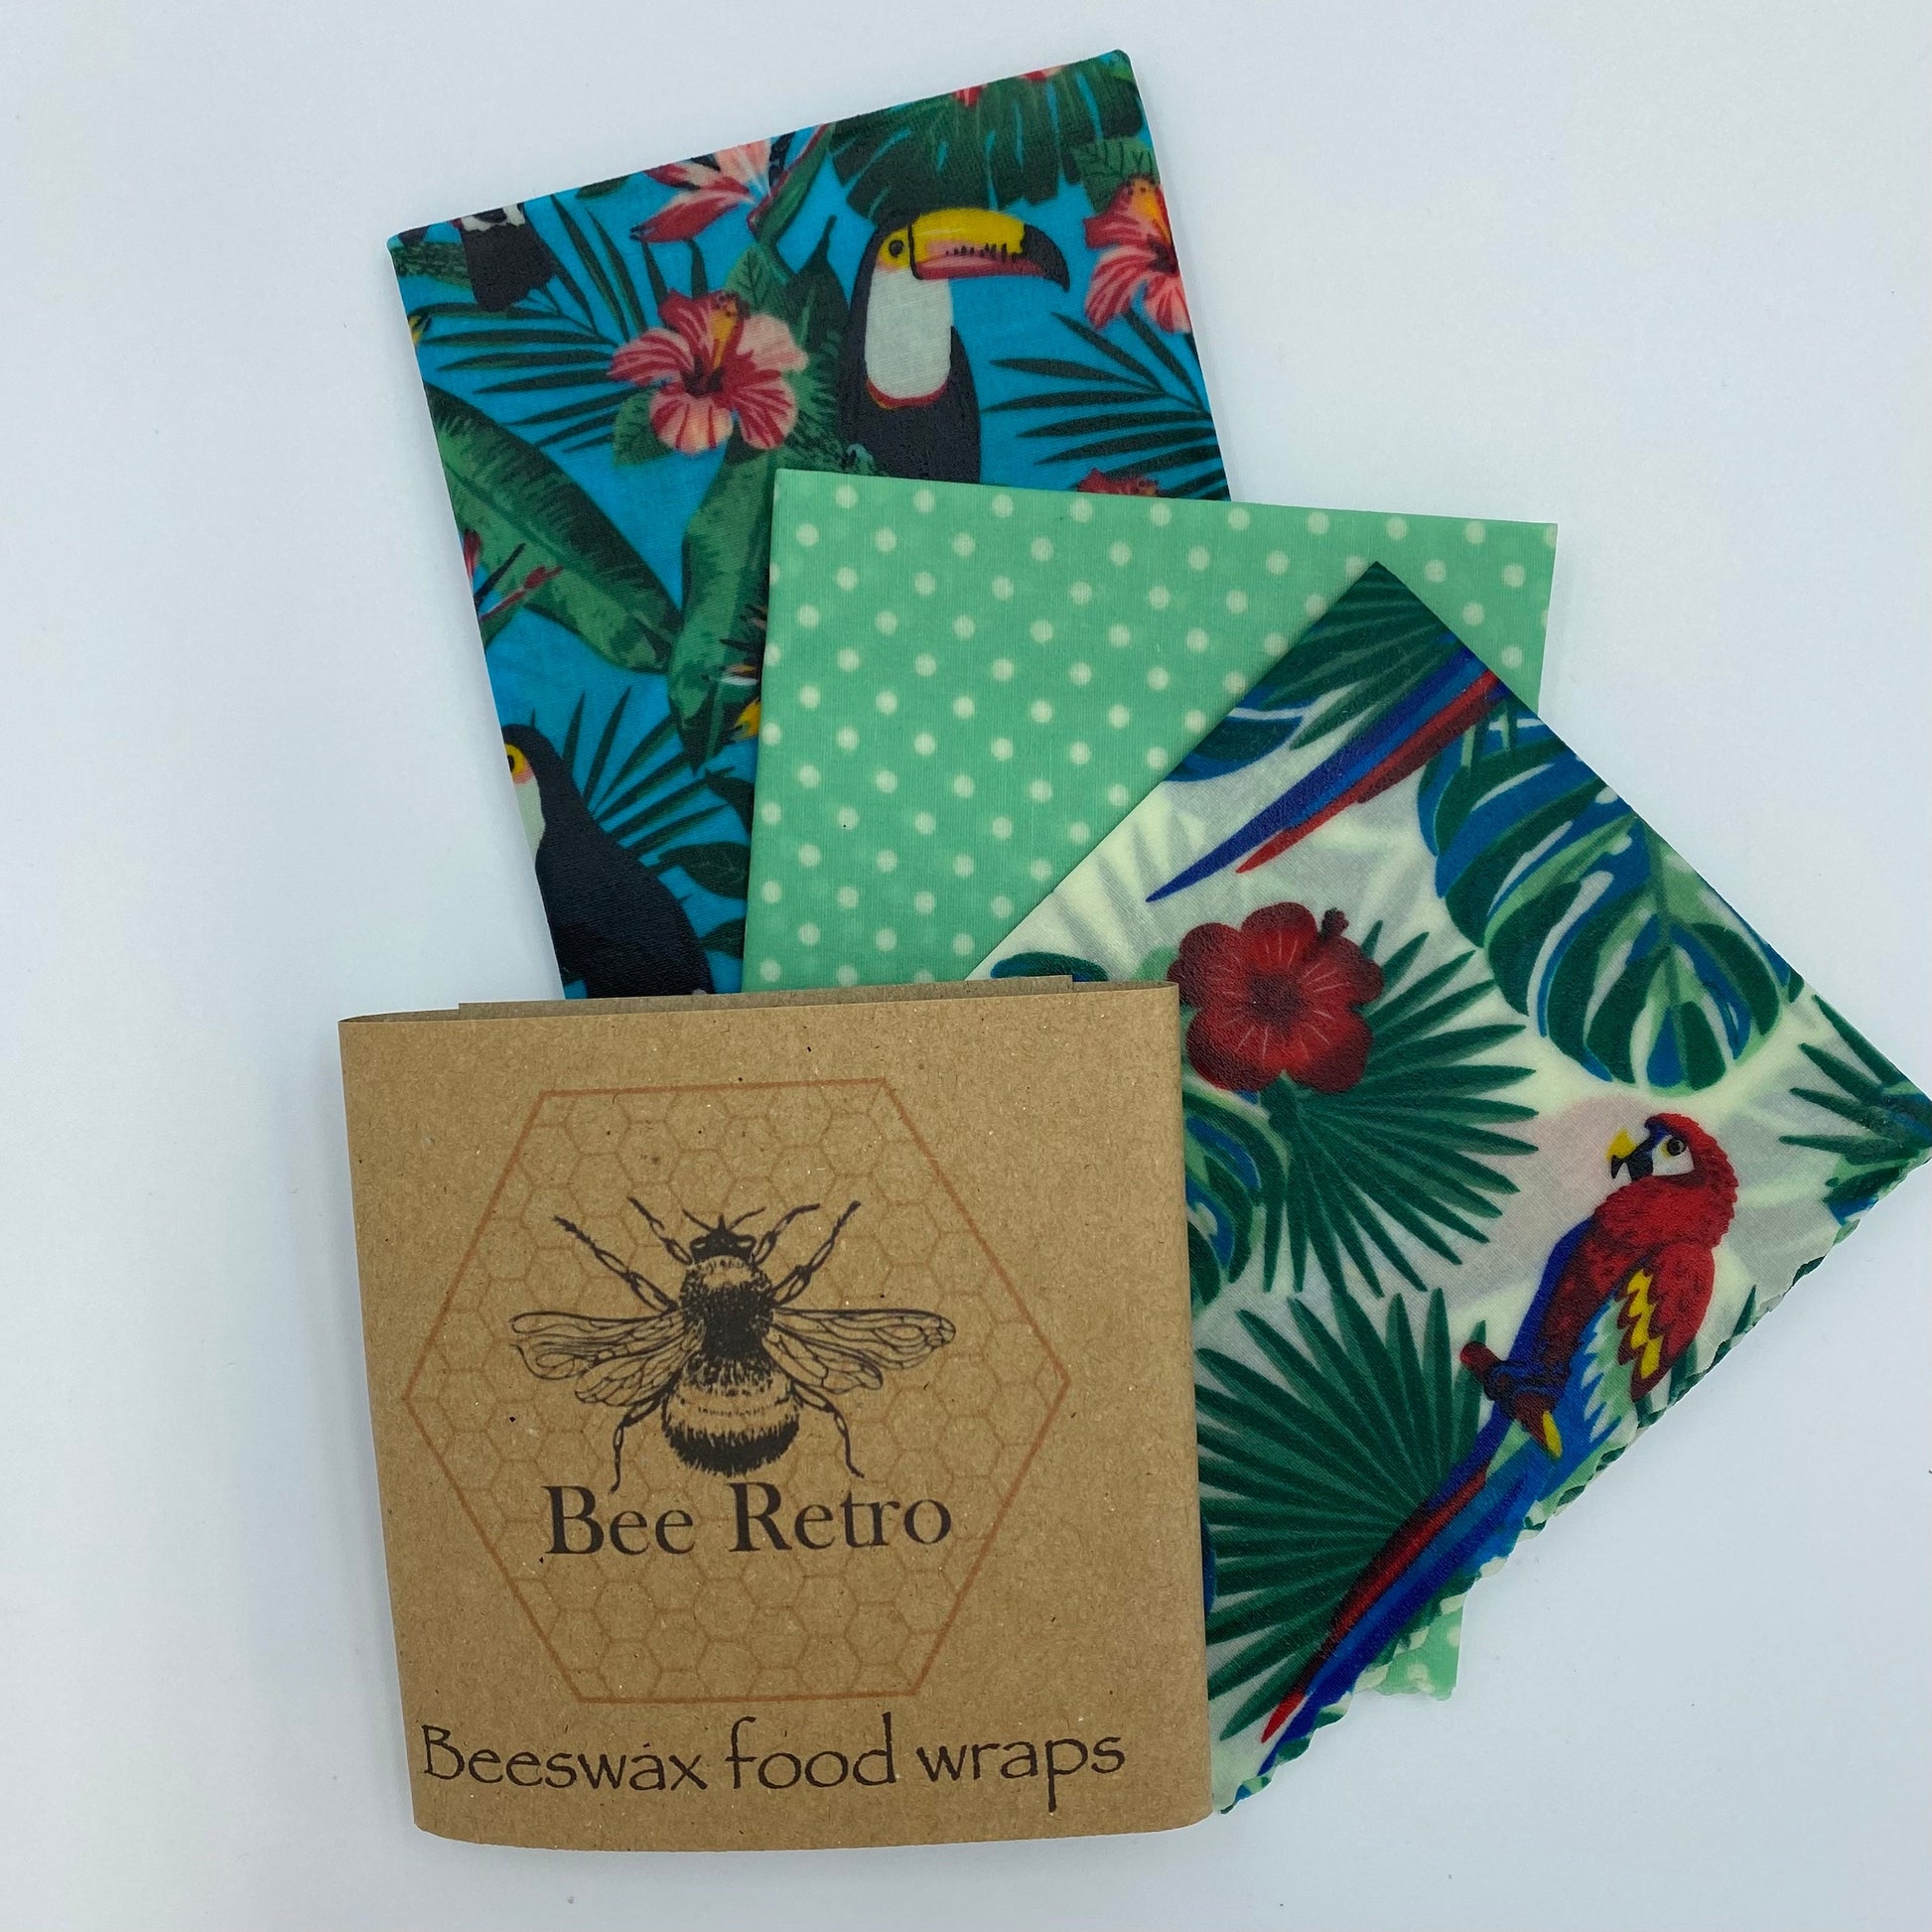 Toucan and Parrot Beeswax Food Wraps-2